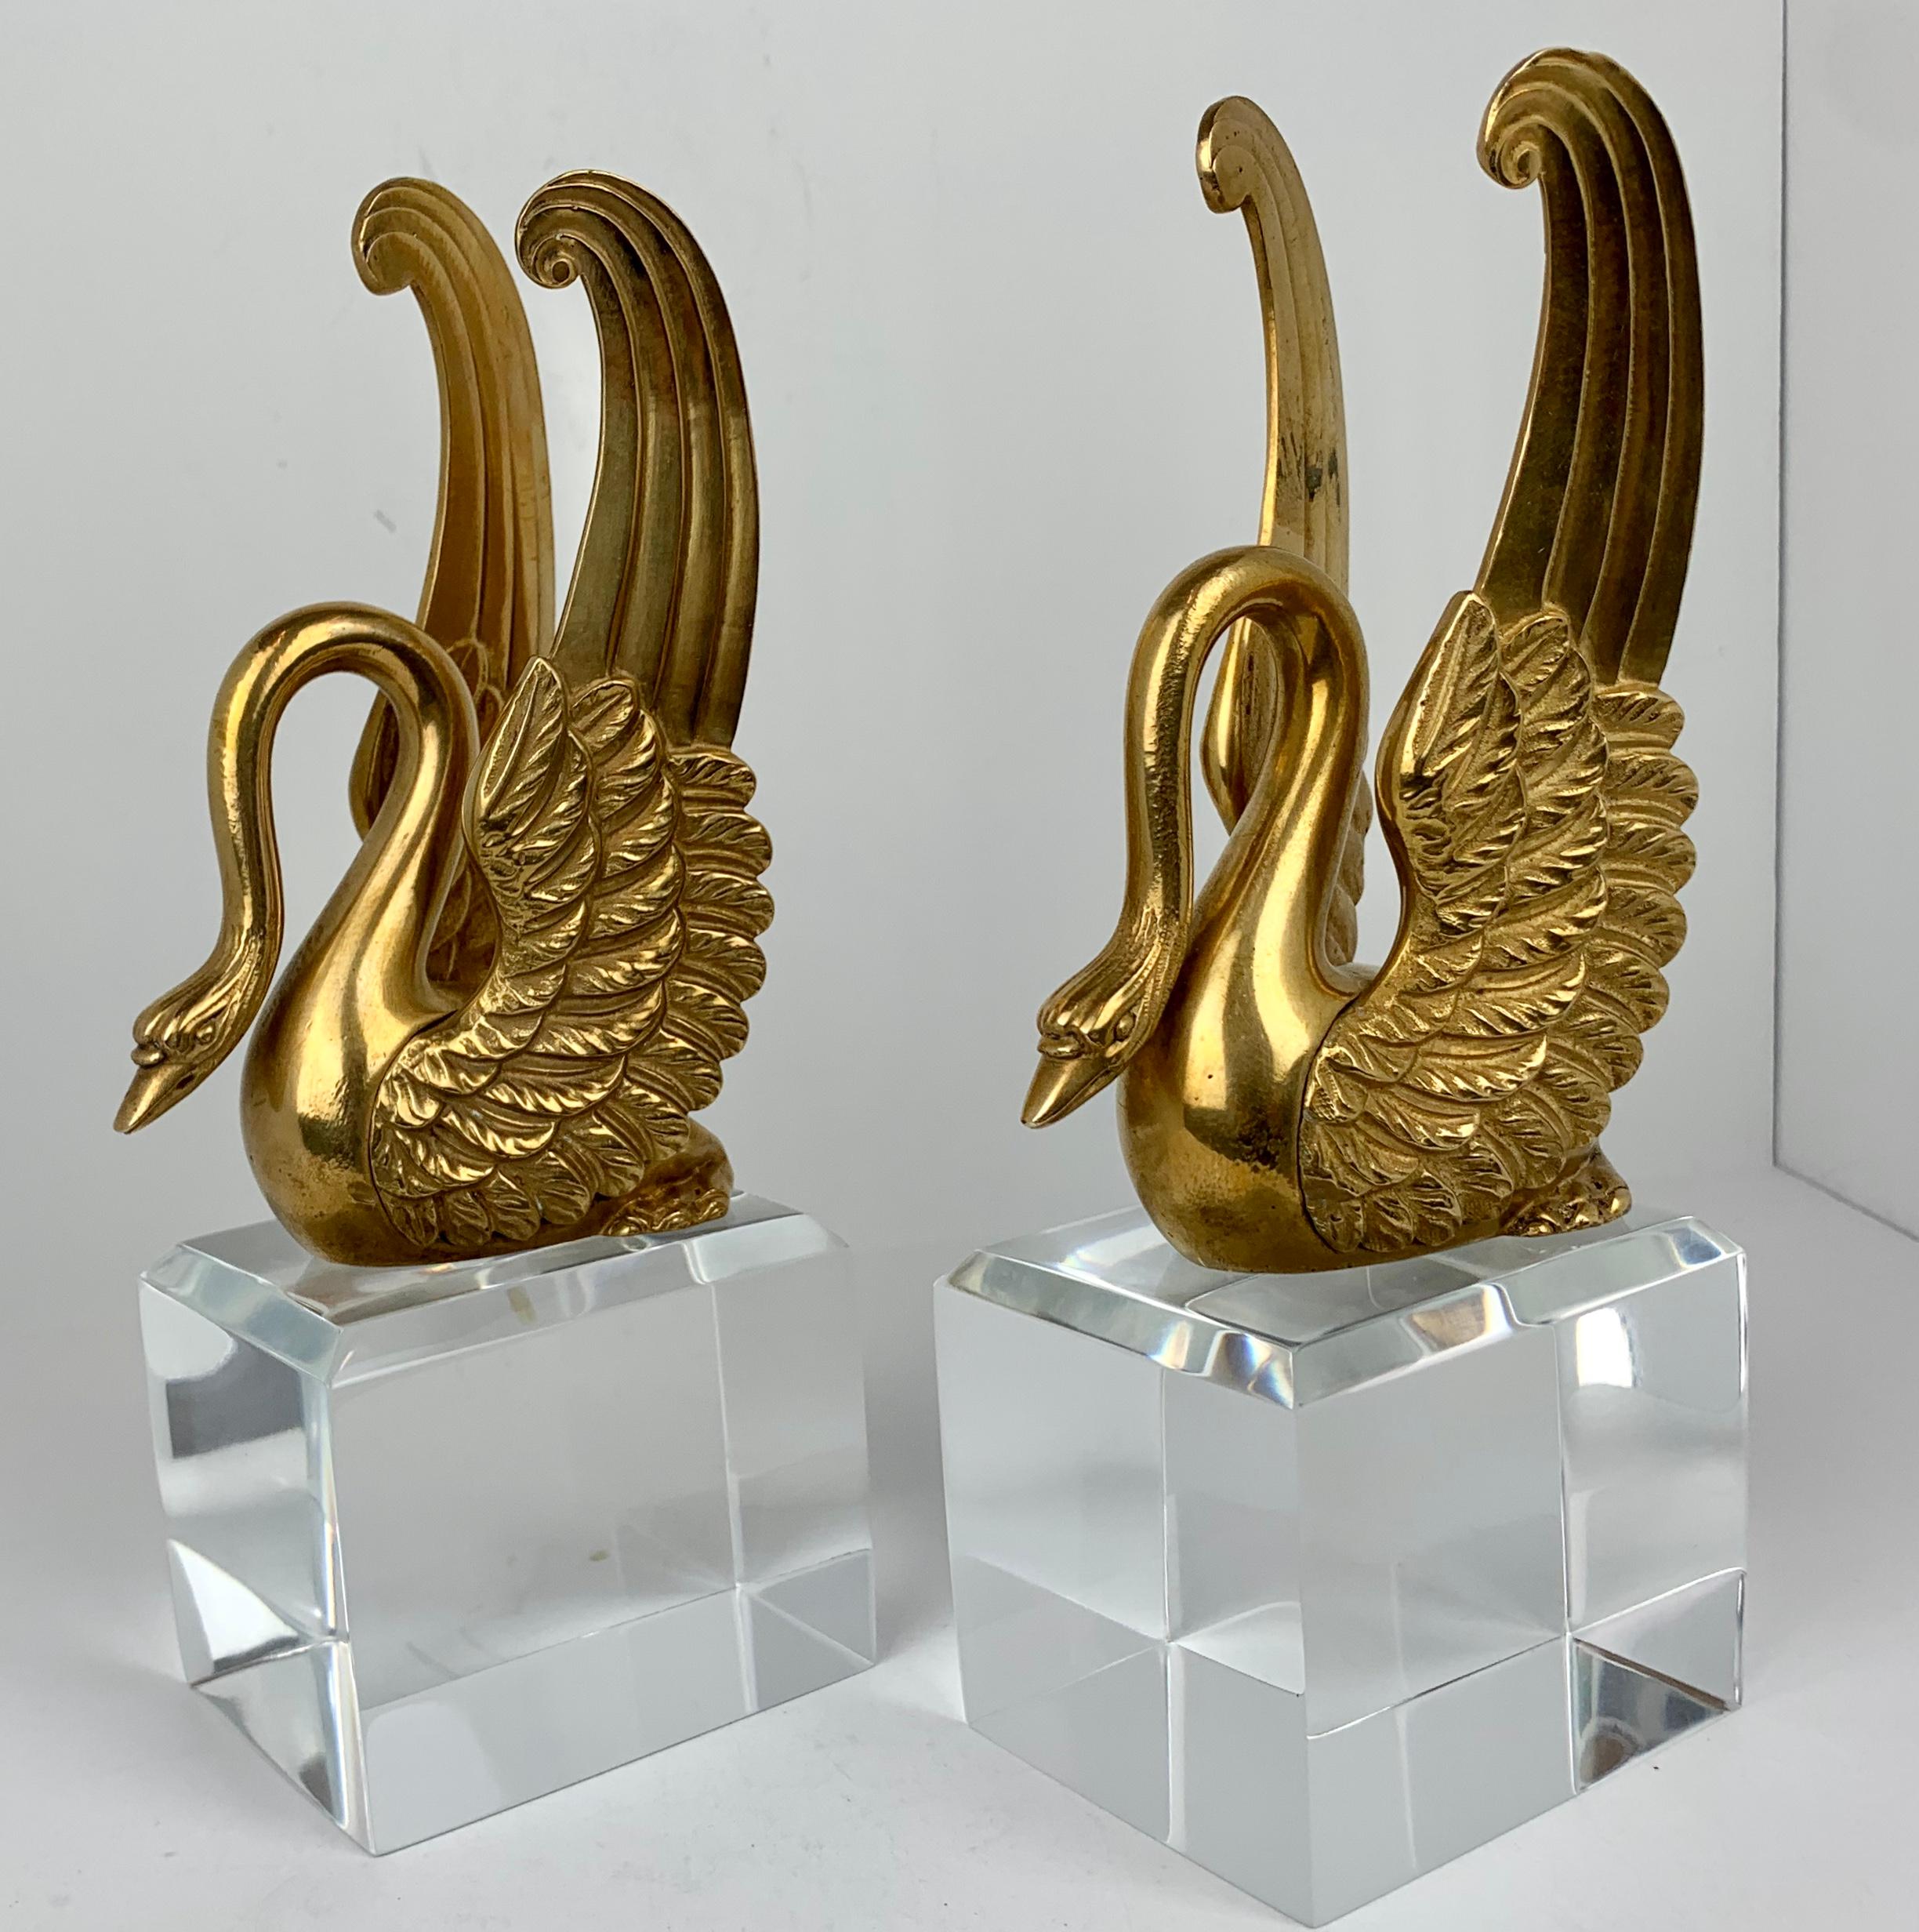 Pair of nineteenth century Empire style well modeled bronze doré swans with their wings folded back. They are well chased and now custom mounted on beveled Lucite plinths. One wing on one swan has a wing very slightly bent inward.
Measures: The